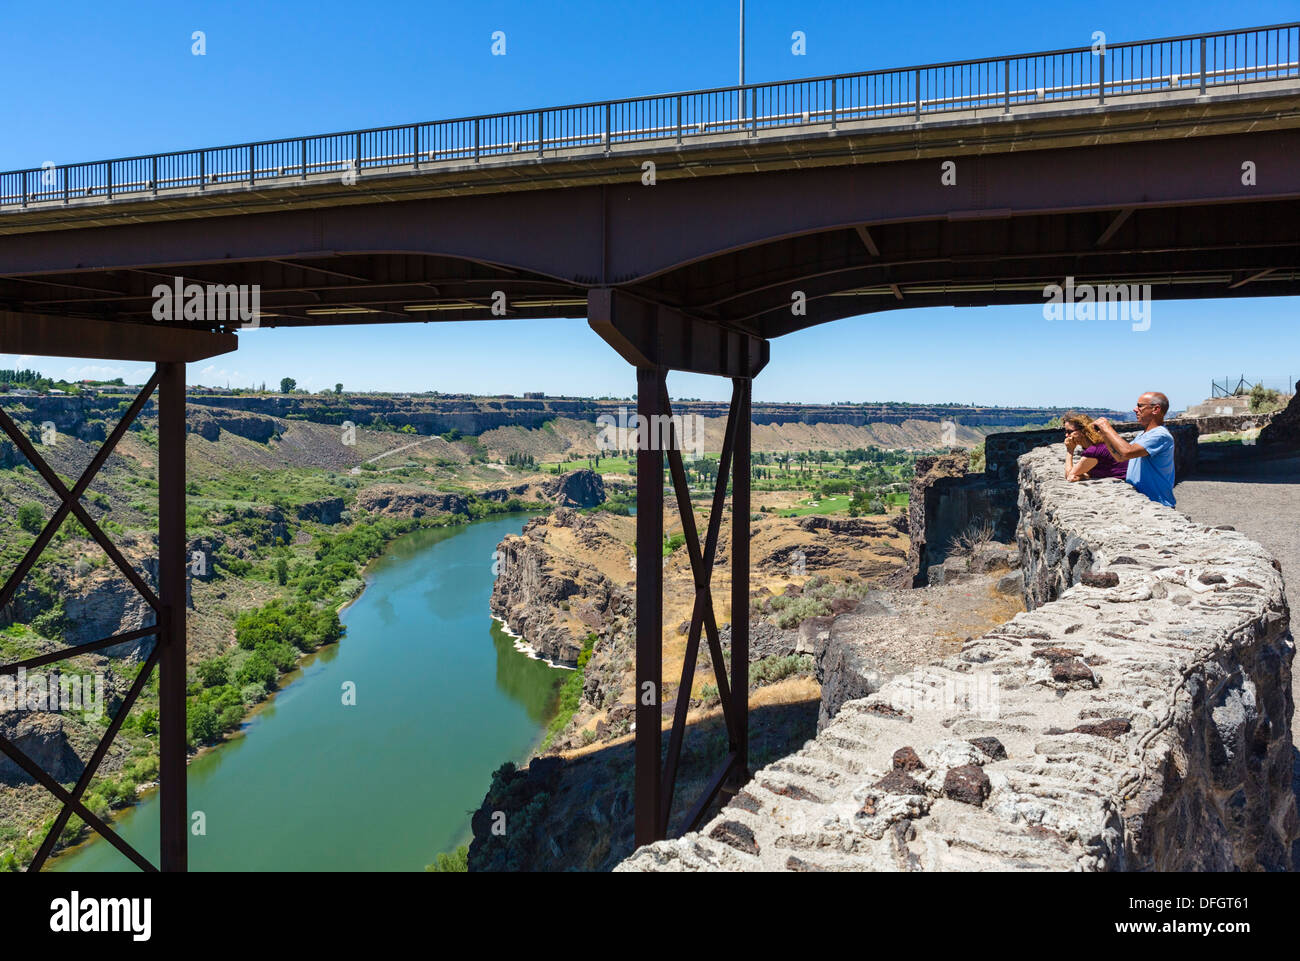 Tourists at Perrine Bridge over the Snake River Canyon, a well known spot for BASE jumping, Twin Falls, Idaho, USA Stock Photo